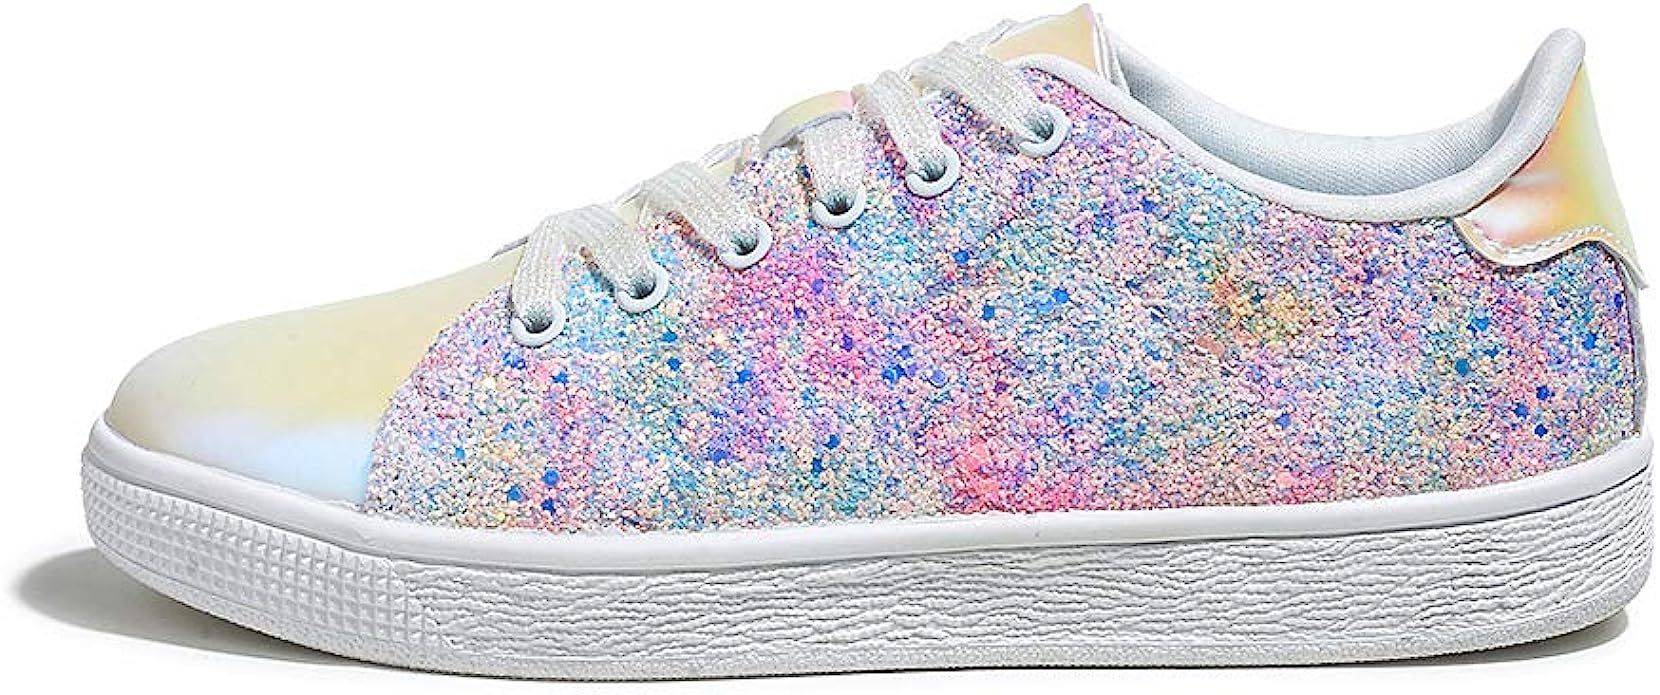 LUCKY STEP Glitter Sneakers Lace up | Fashion Sneakers | Sparkly Shoes for Women | Amazon (US)